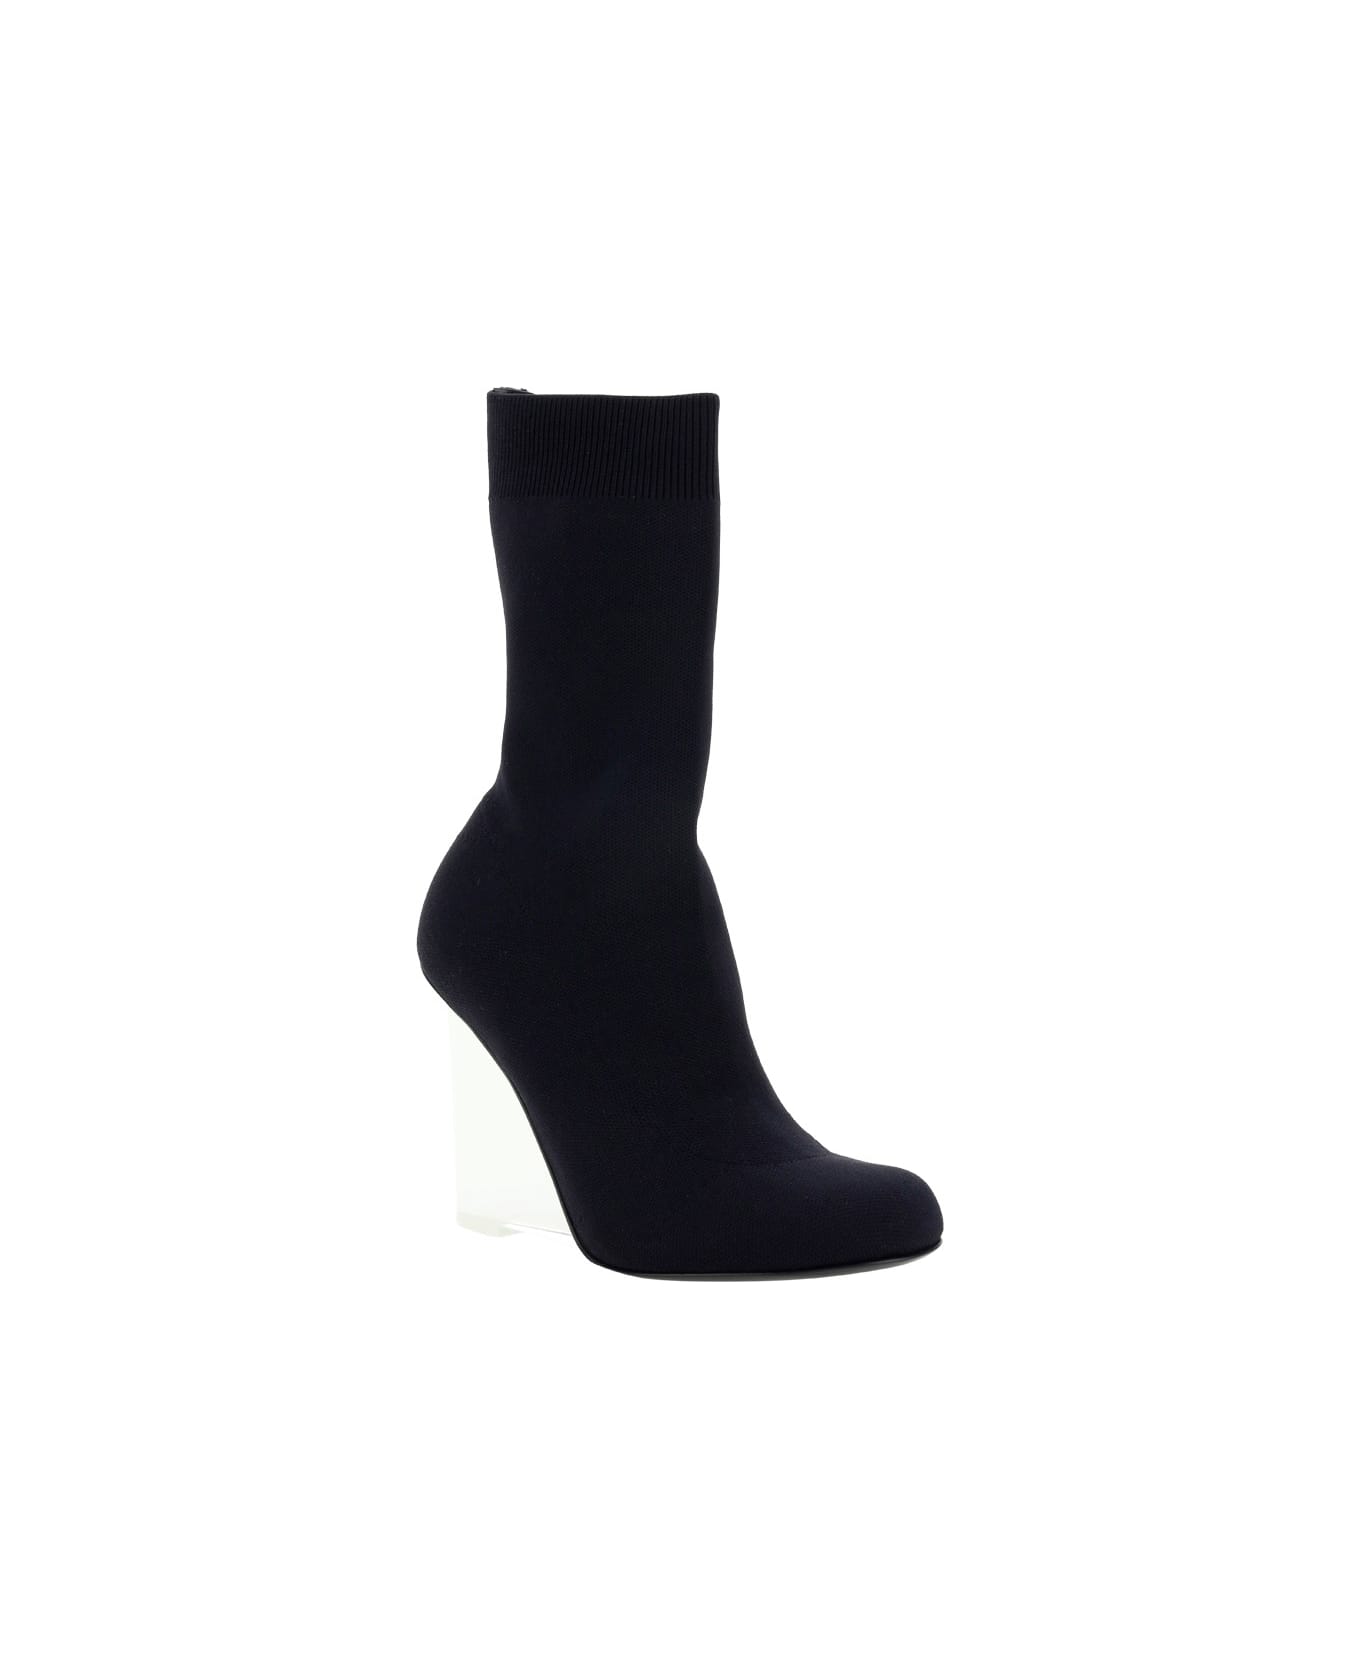 Alexander McQueen Shard Ankle Boots - Black ブーツ